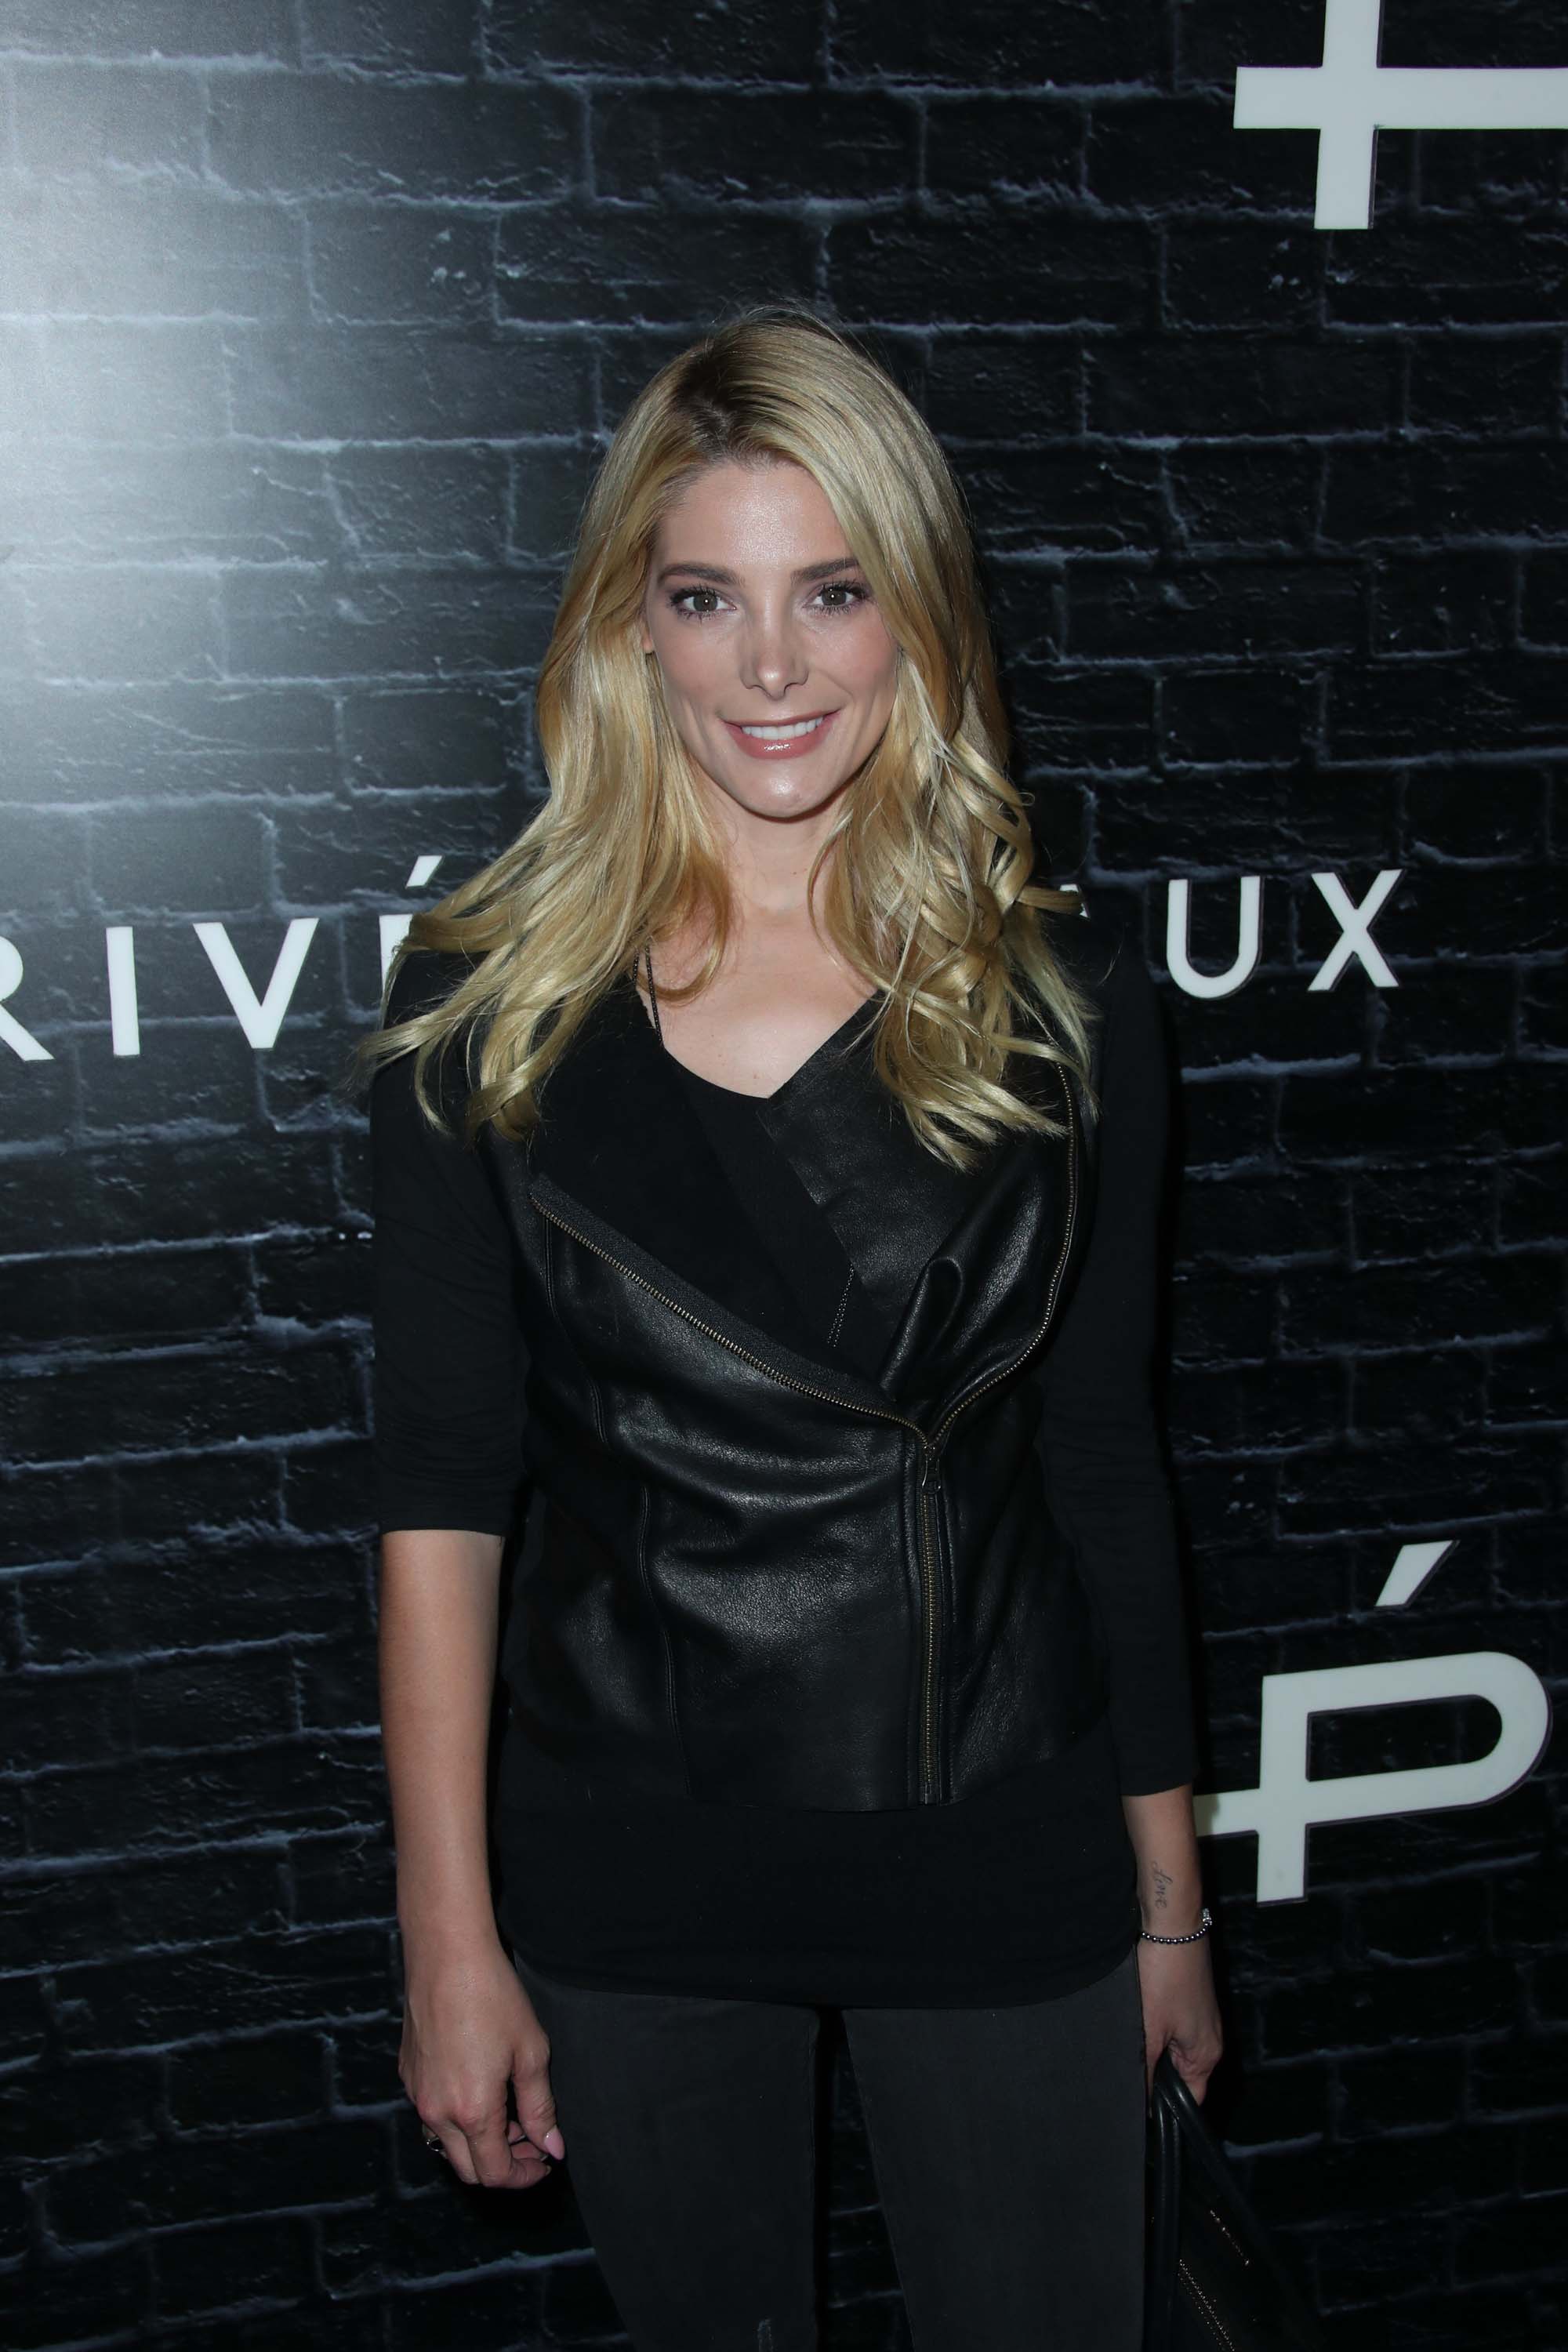 Ashley Greene attends Prive Revaux Launch Event